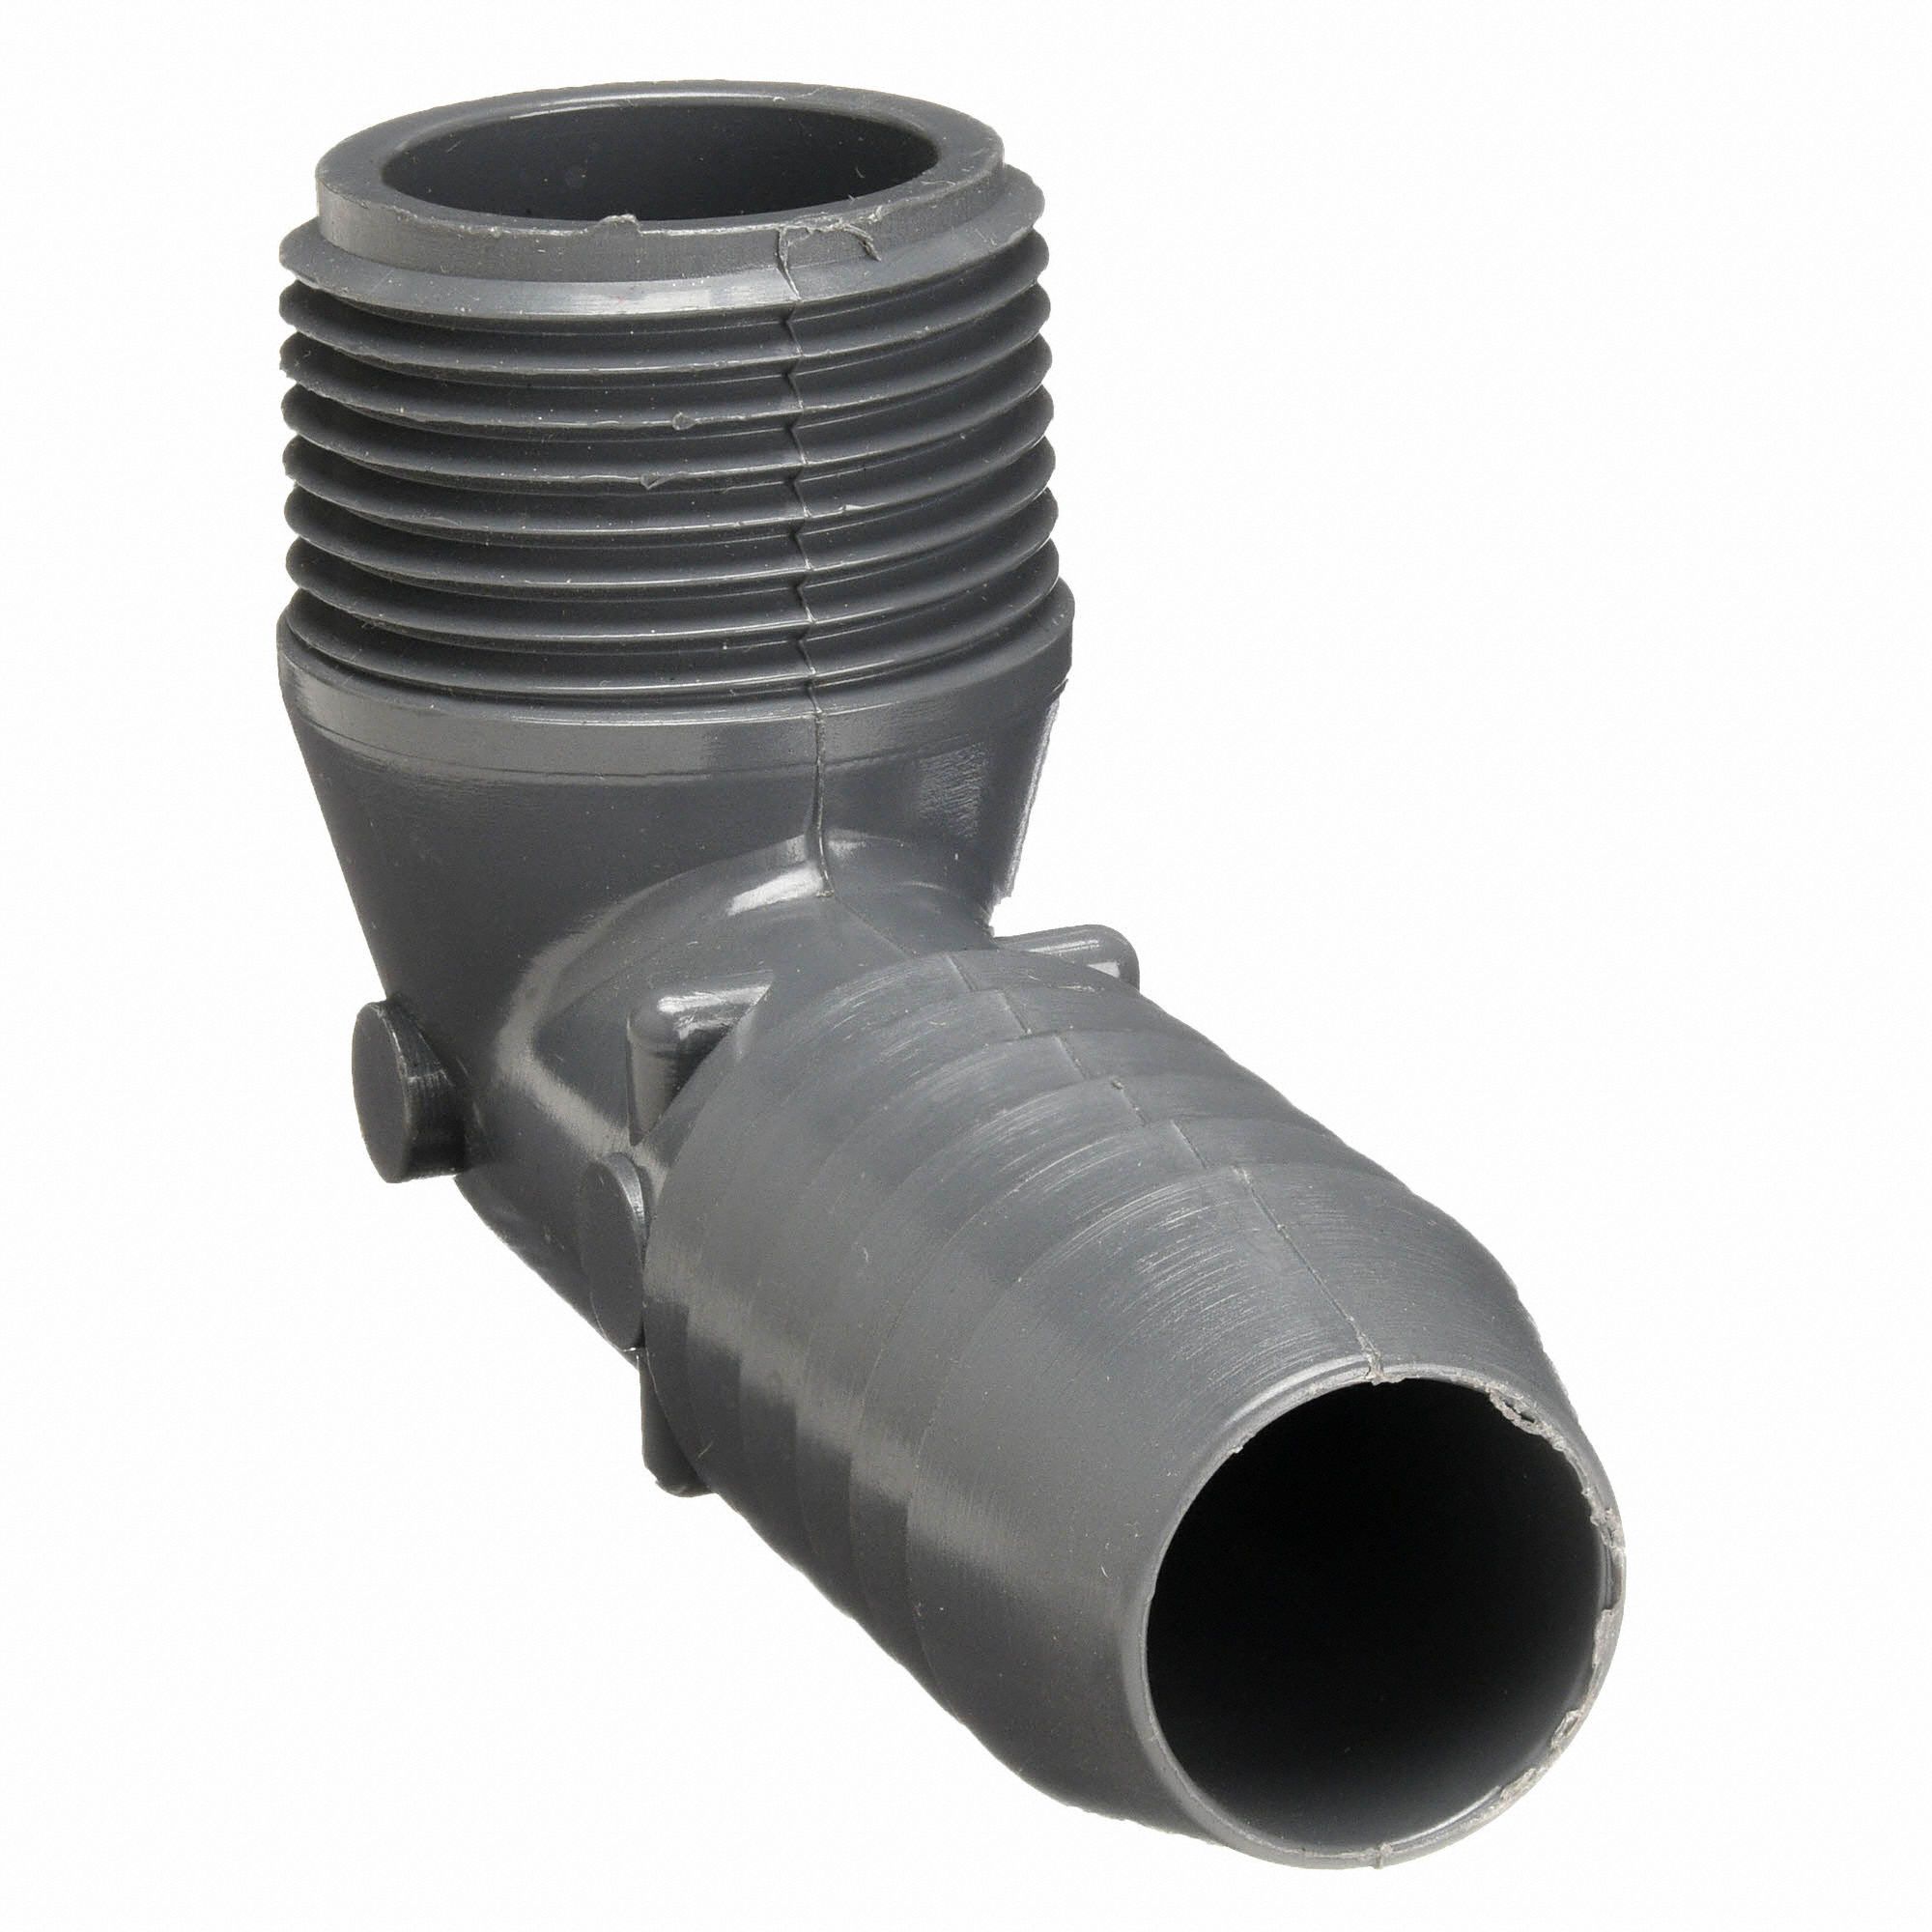 PVC Poly Insert 90 Degree Barb X Barb Elbow 1406007rmc 36 for sale online LASCO 3/4 In 